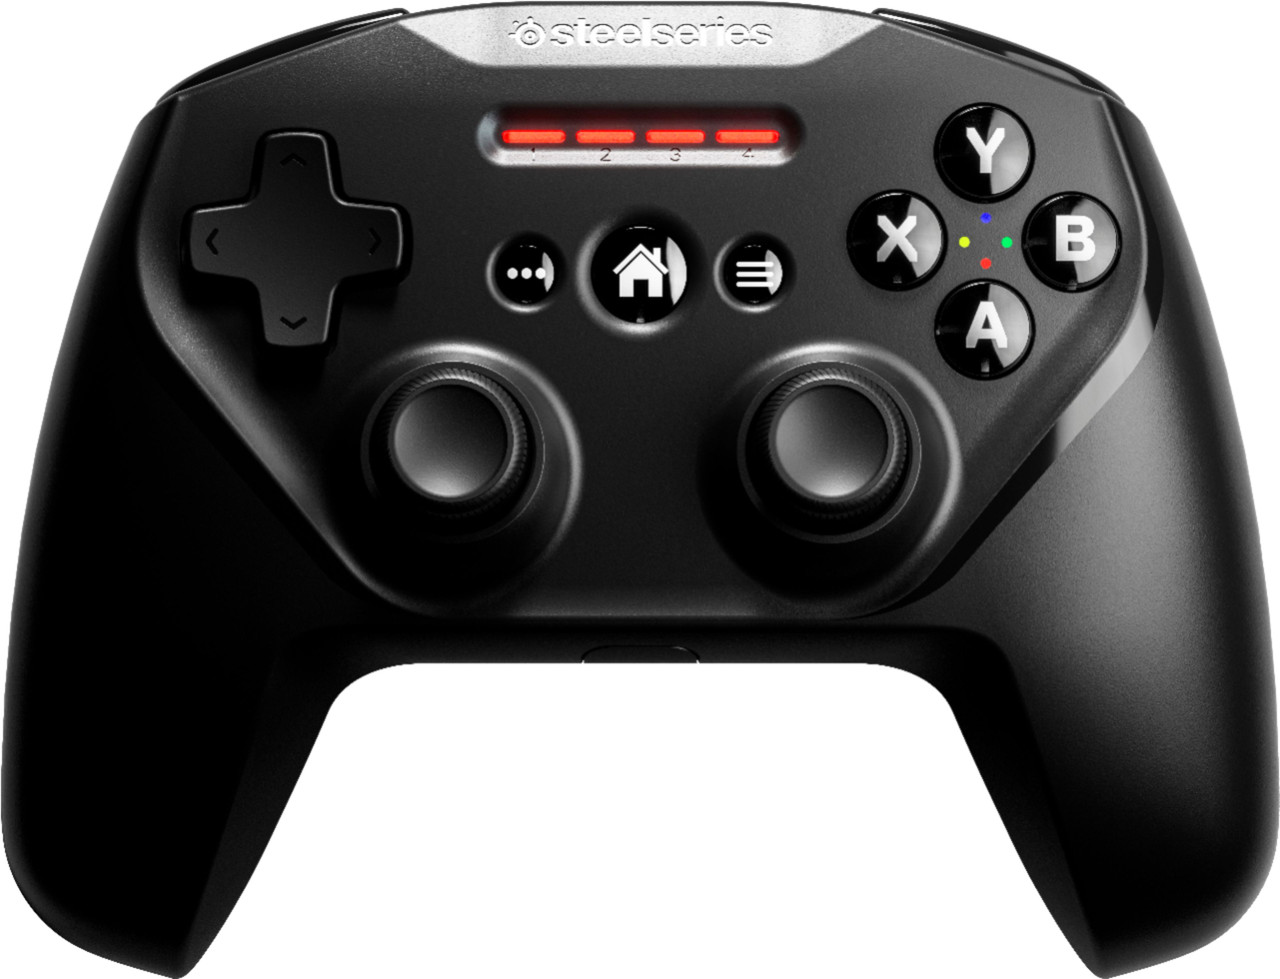 SteelSeries - Nimbus+ Wireless Gaming Controller for Apple iOS, iPadOS, tvOS Devices